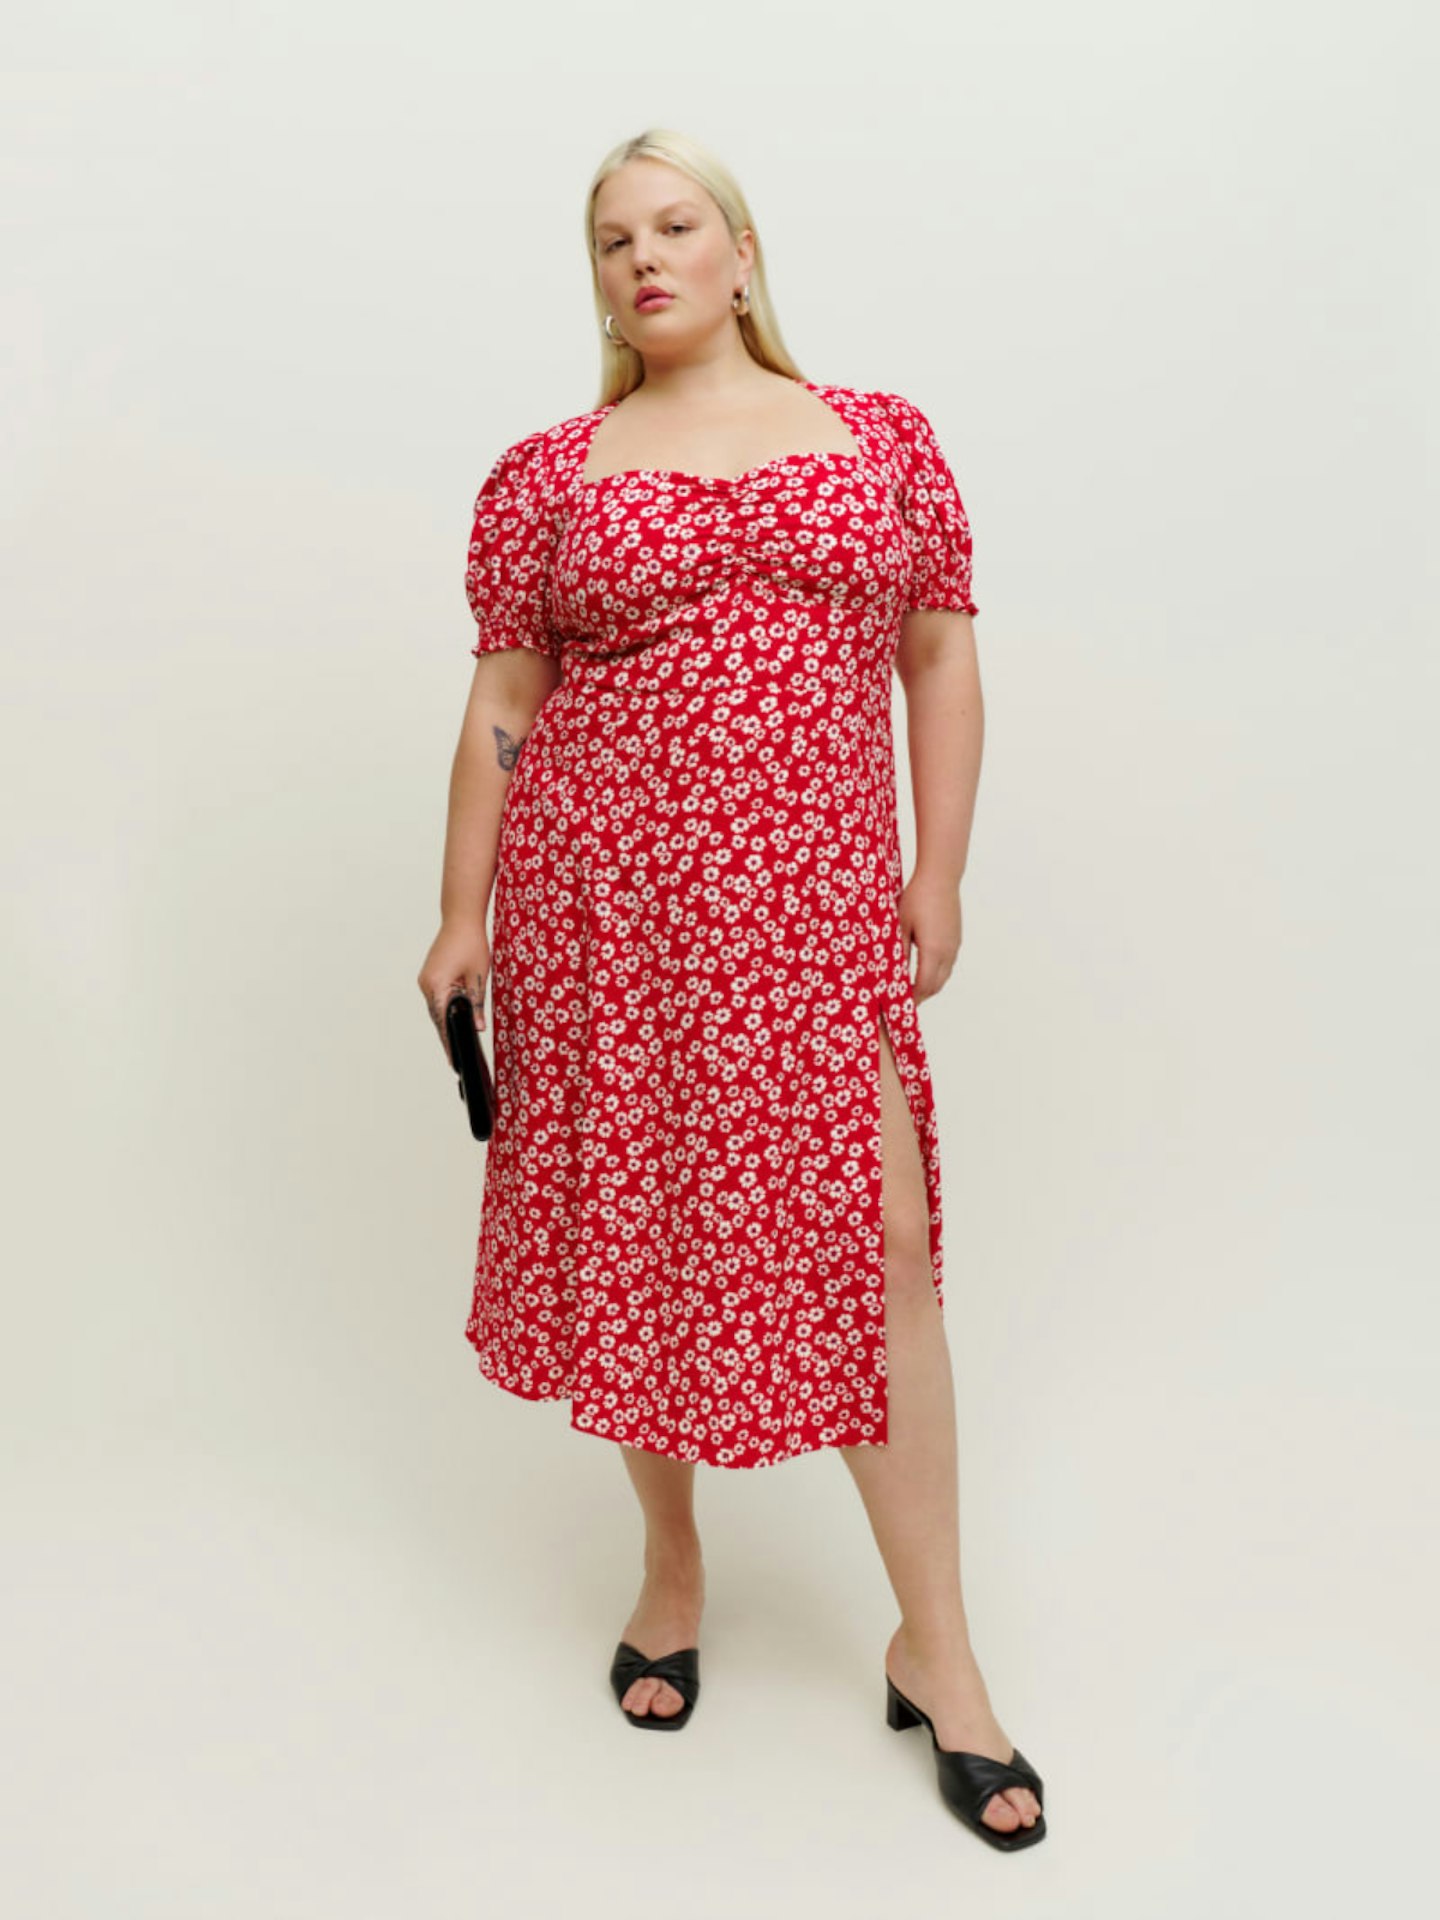 Reformation Lacey Dress 